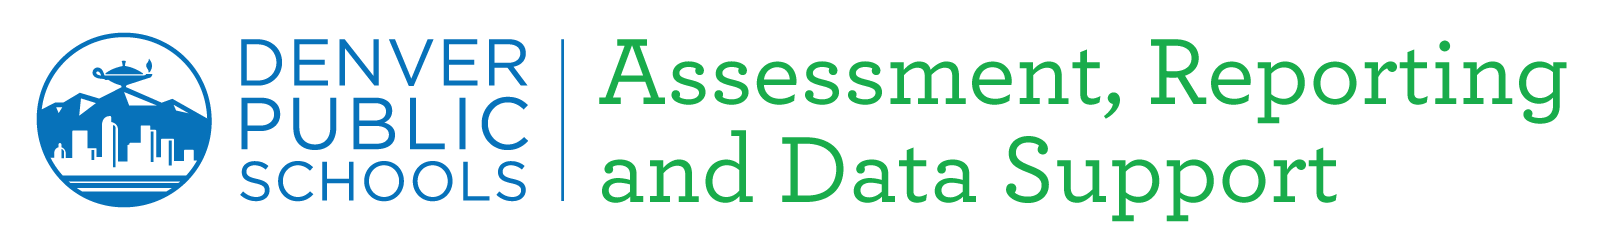 Department of Assessment, Reporting and Data Support